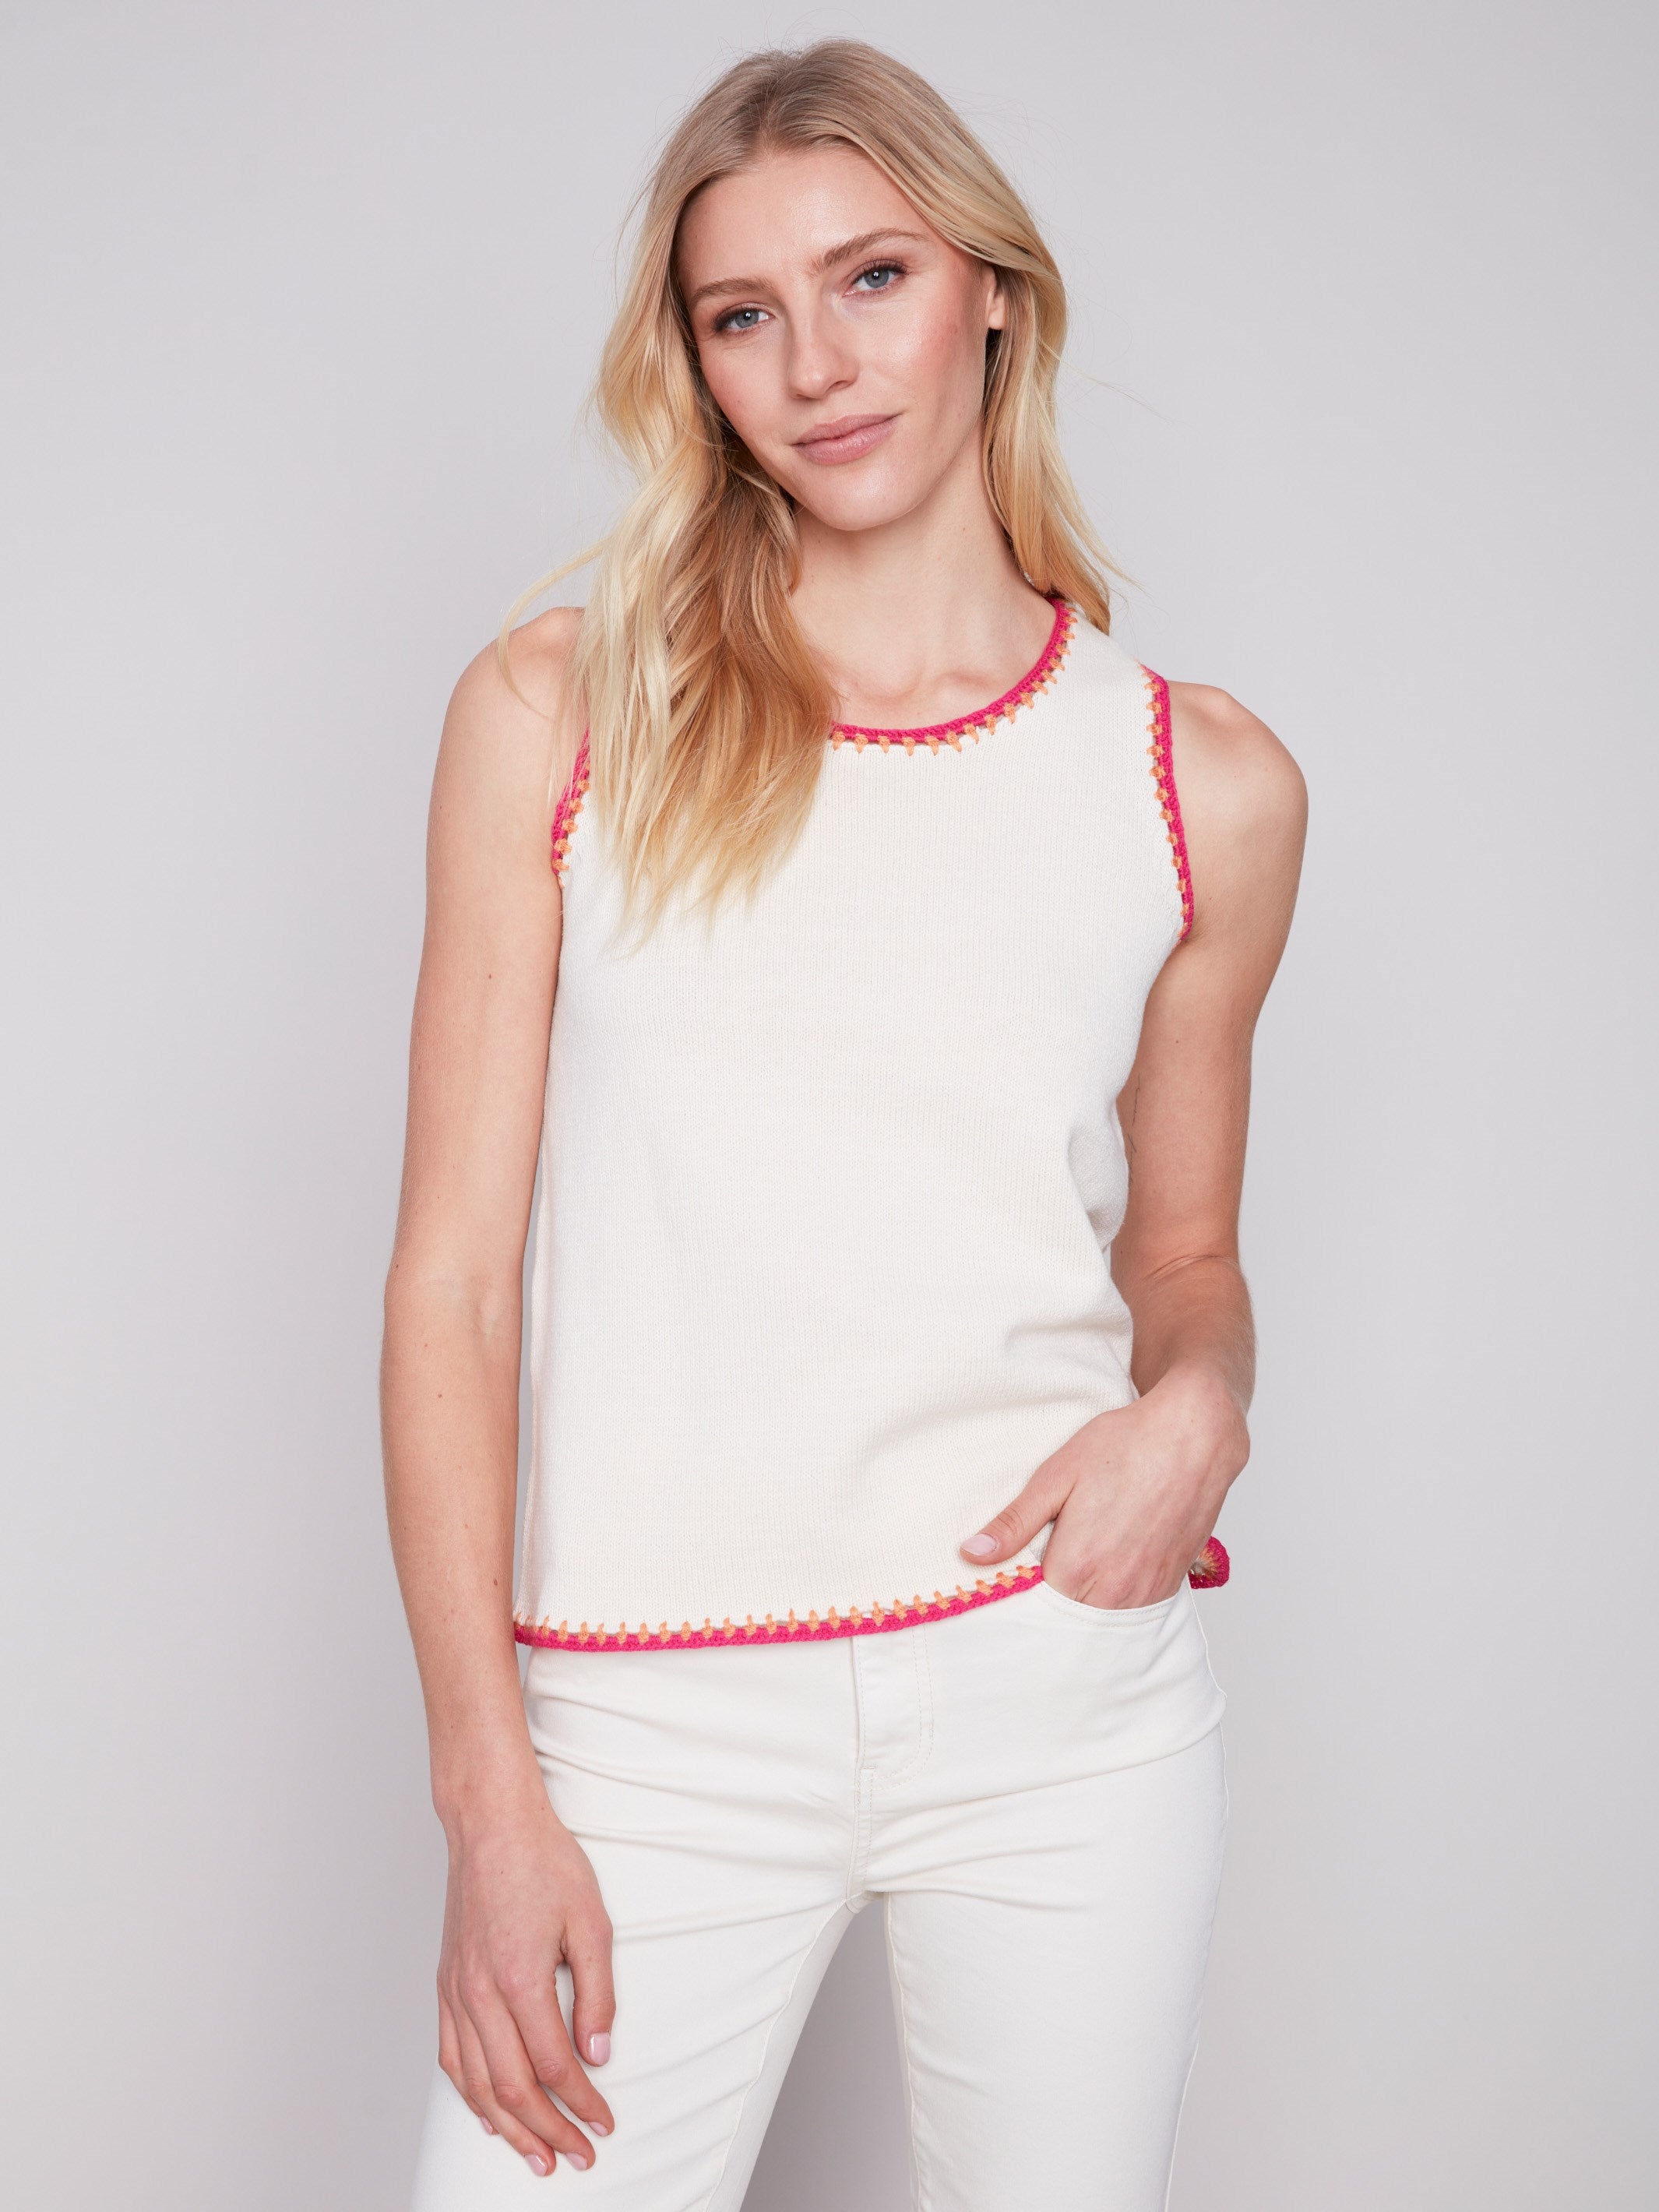 Sleeveless Knit Top with Crochet Detail - Natural - Charlie B Collection Canada - Image 1